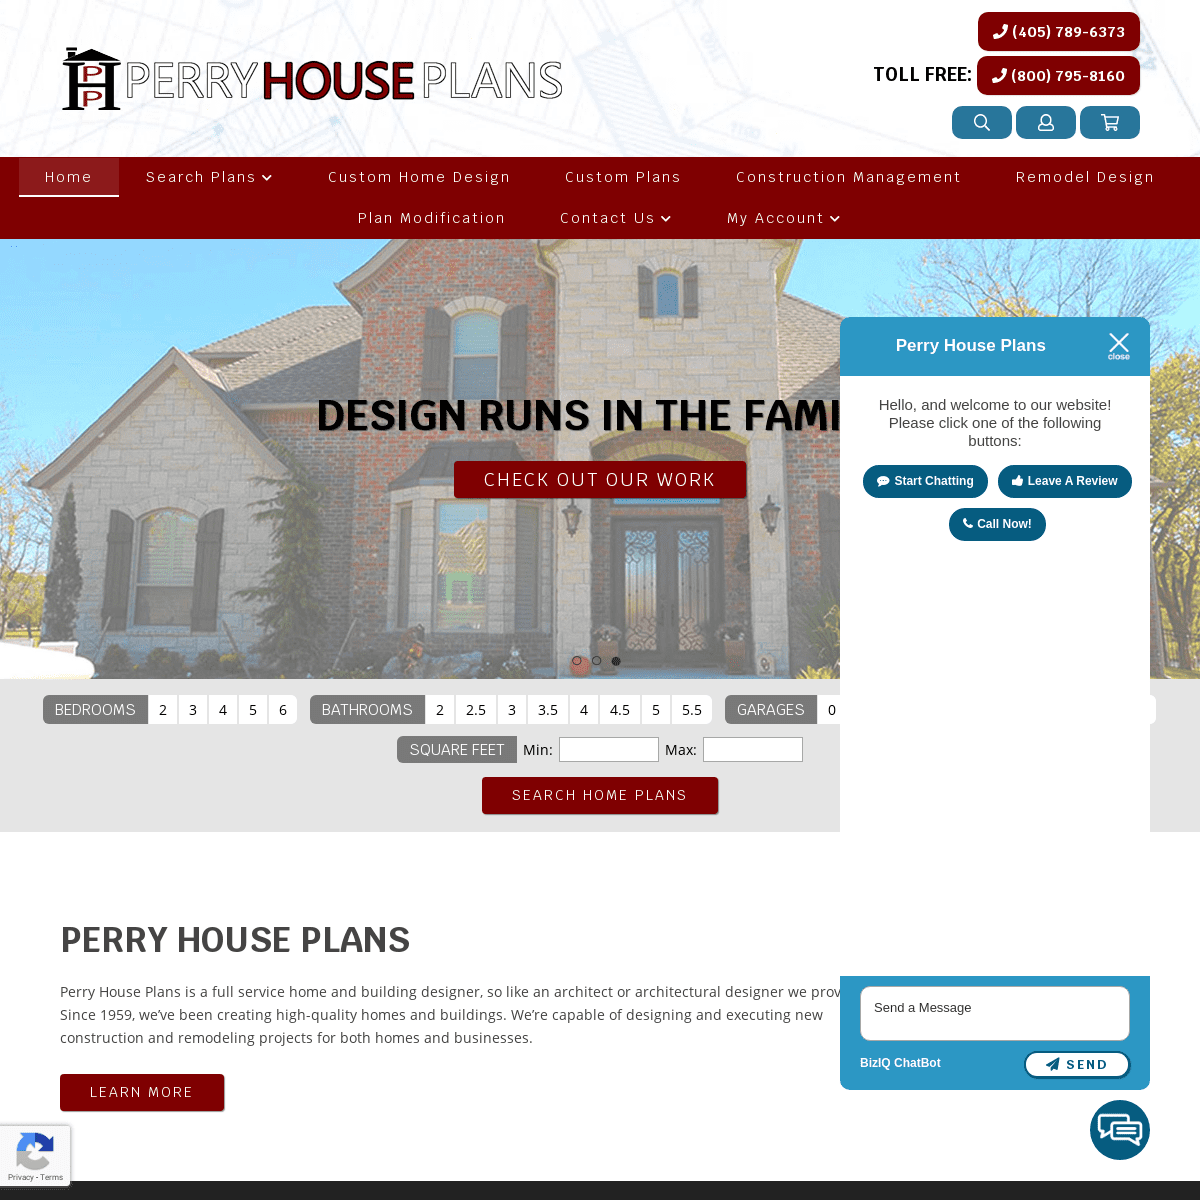 A complete backup of perryhouseplans.com